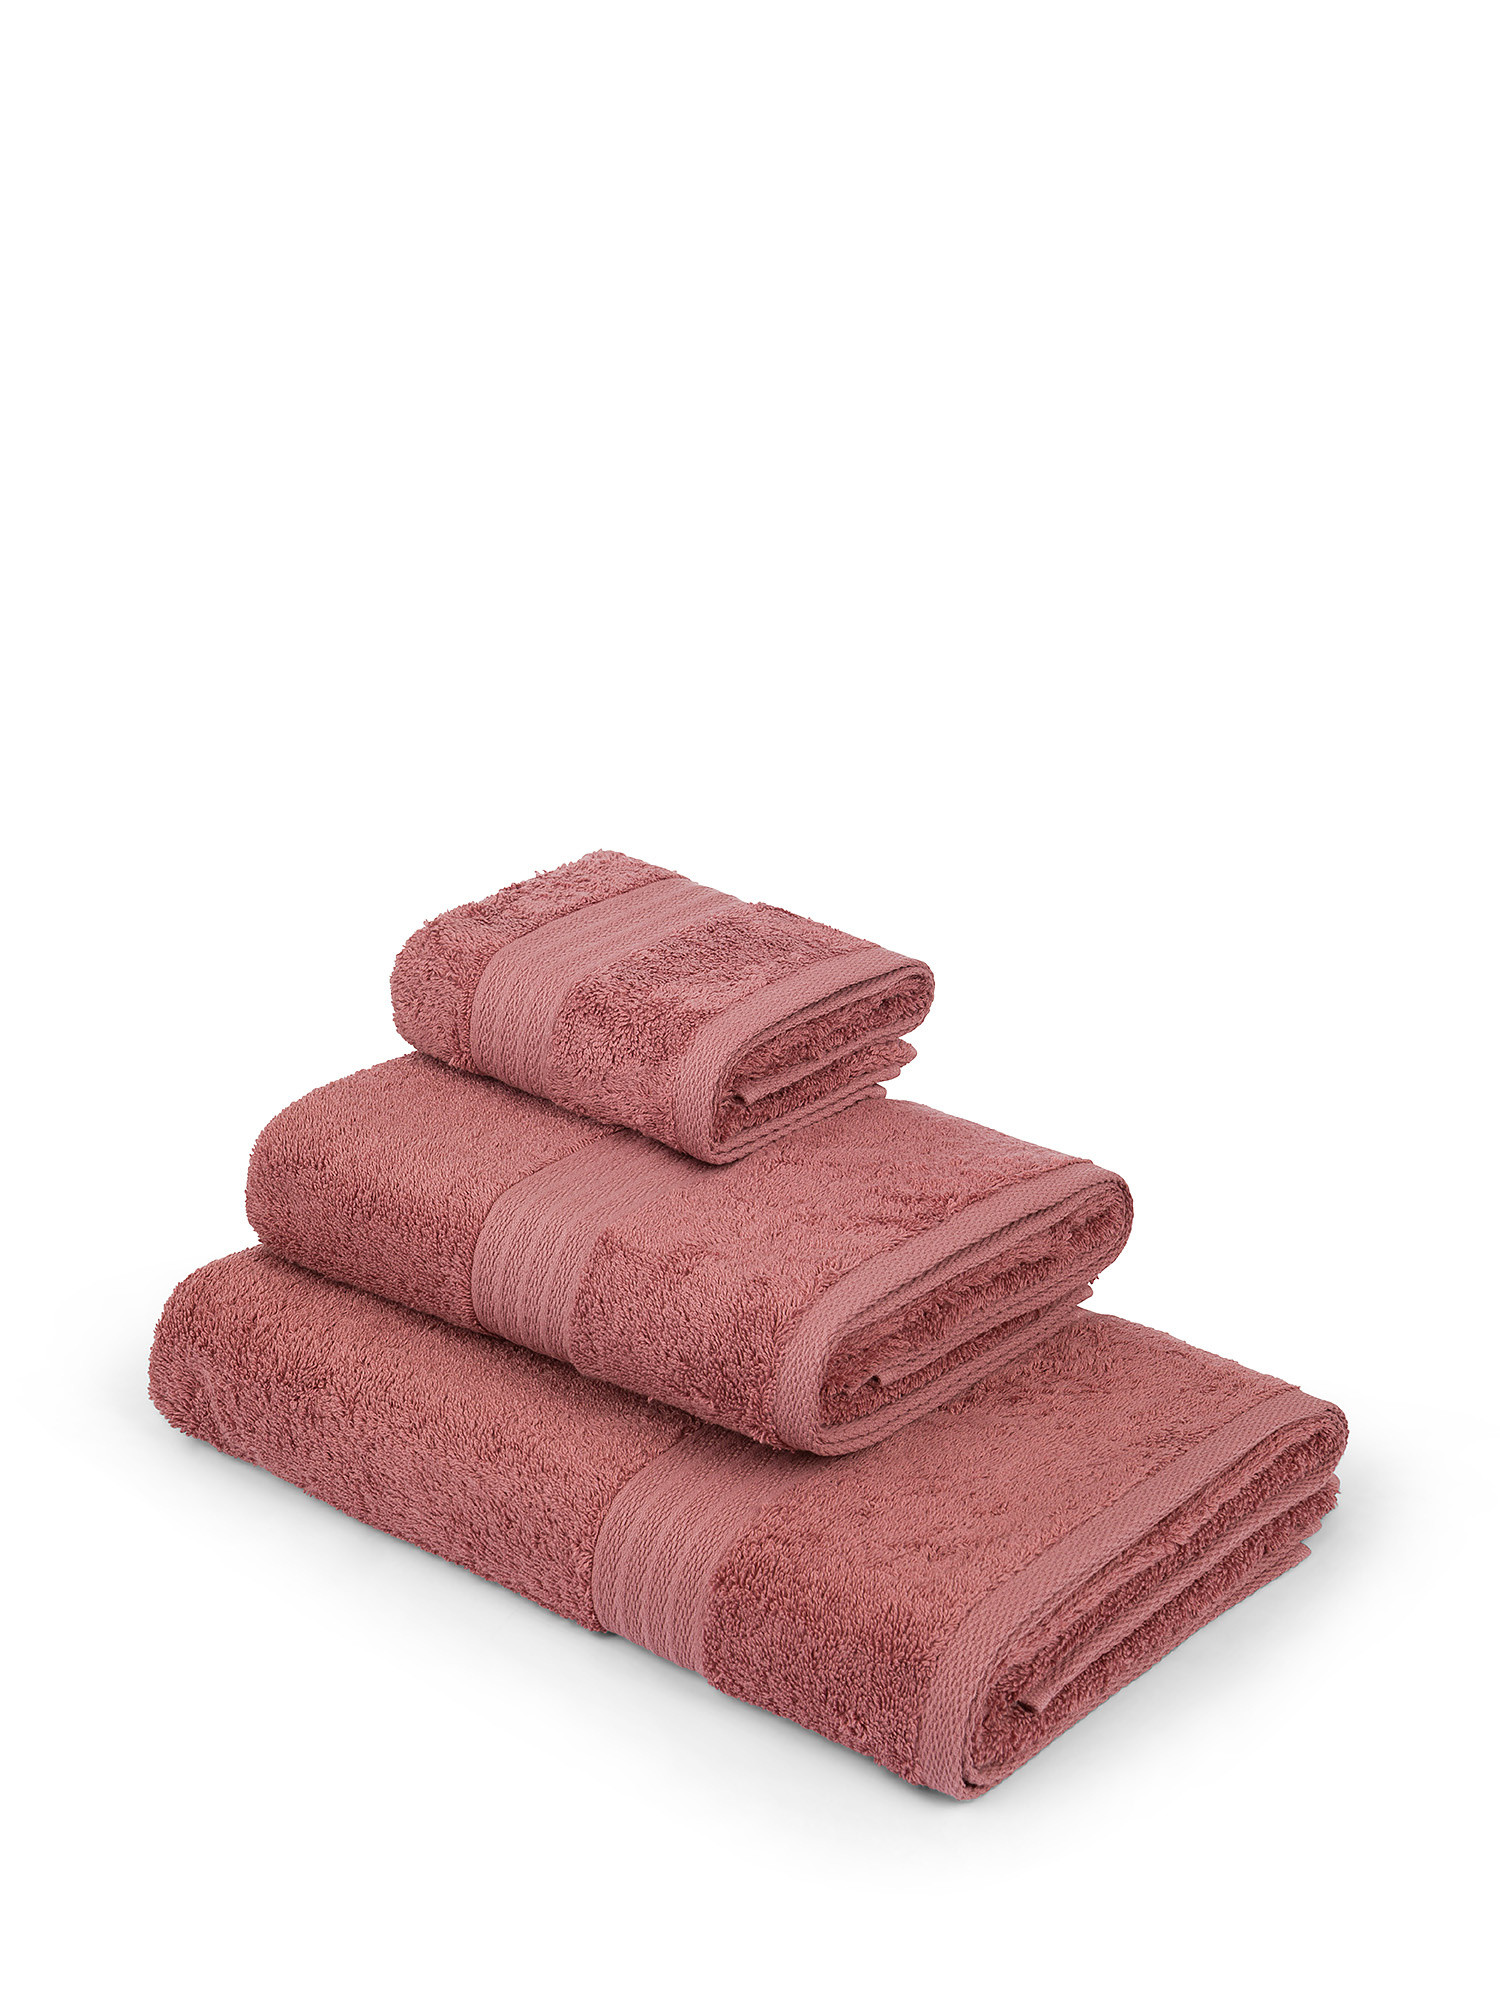 Zefiro solid color 100% cotton towel, Pink, large image number 0